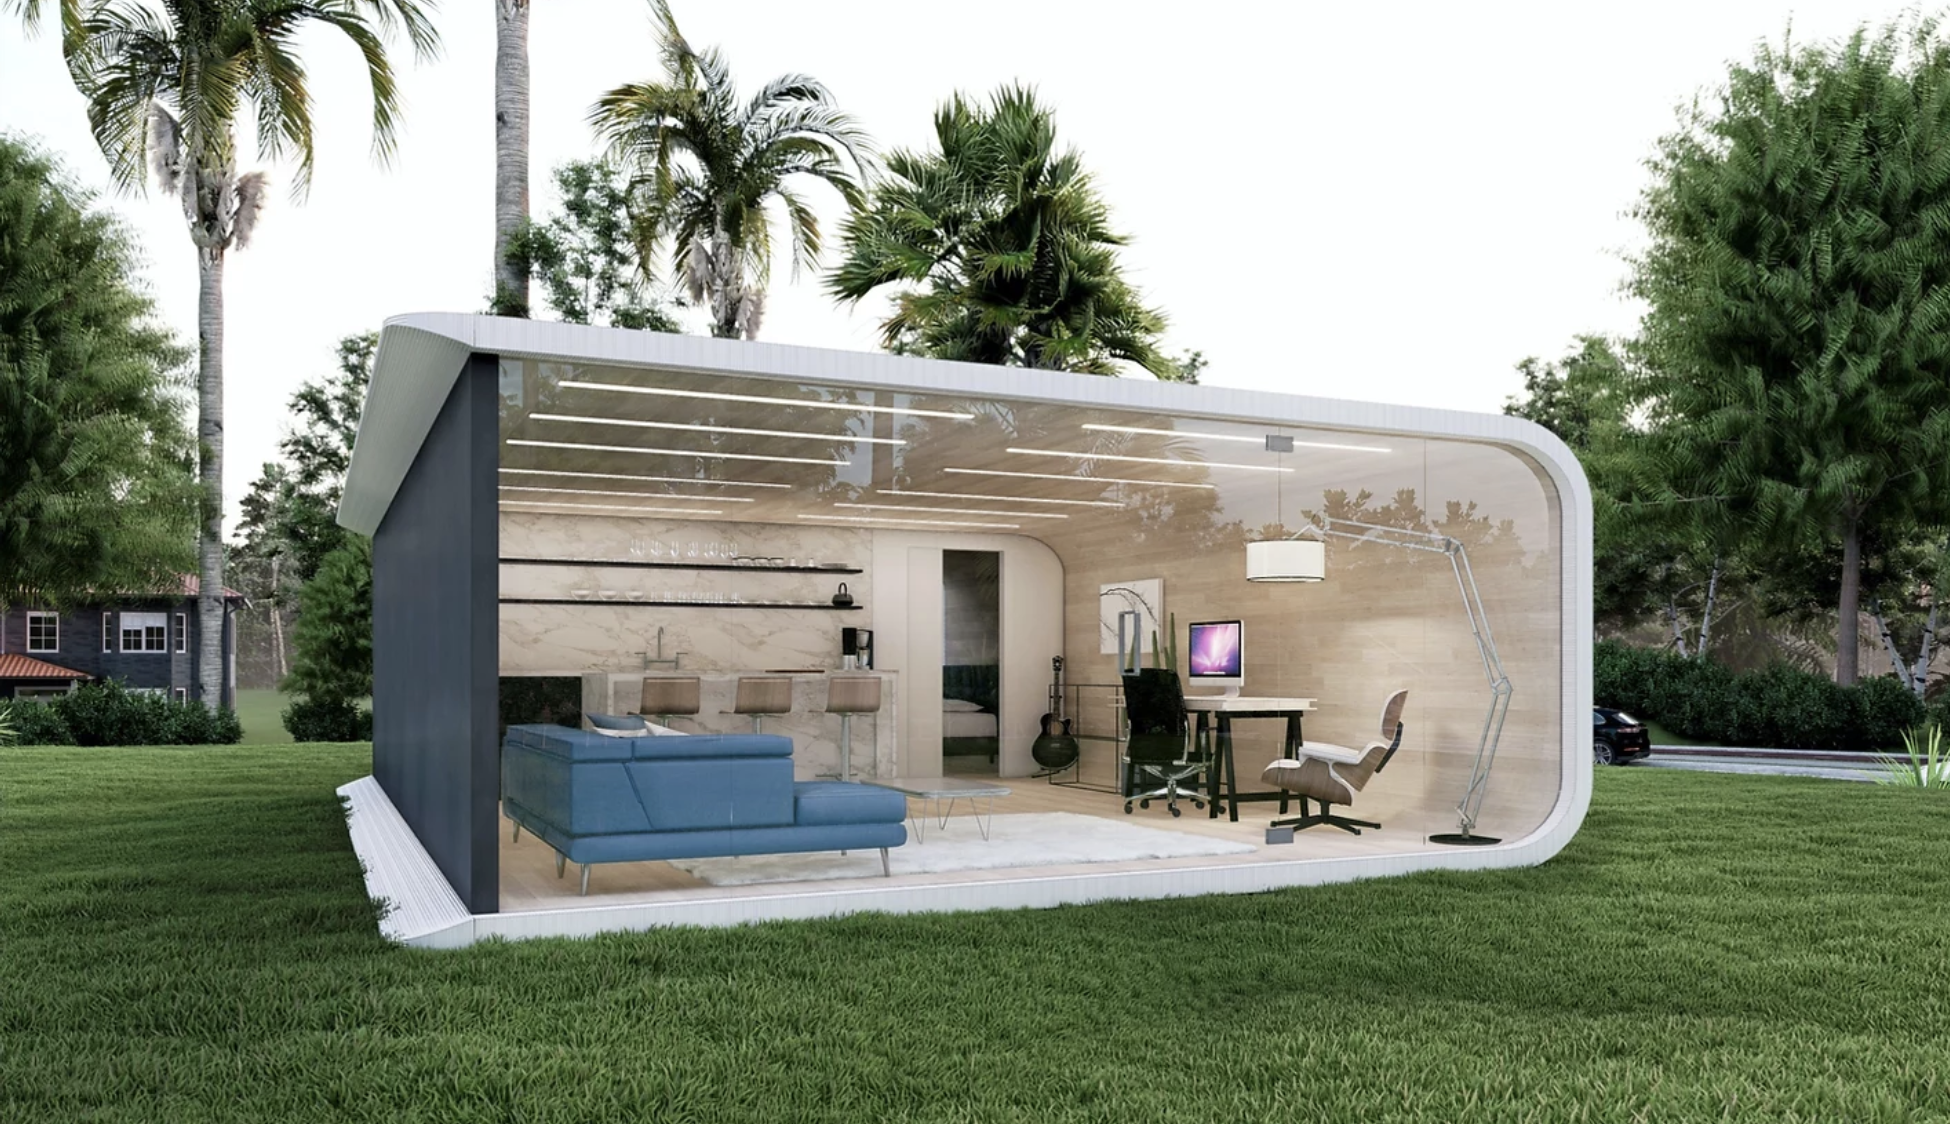 Startup Makes 3D Printed Tiny Homes From Recycled Materials